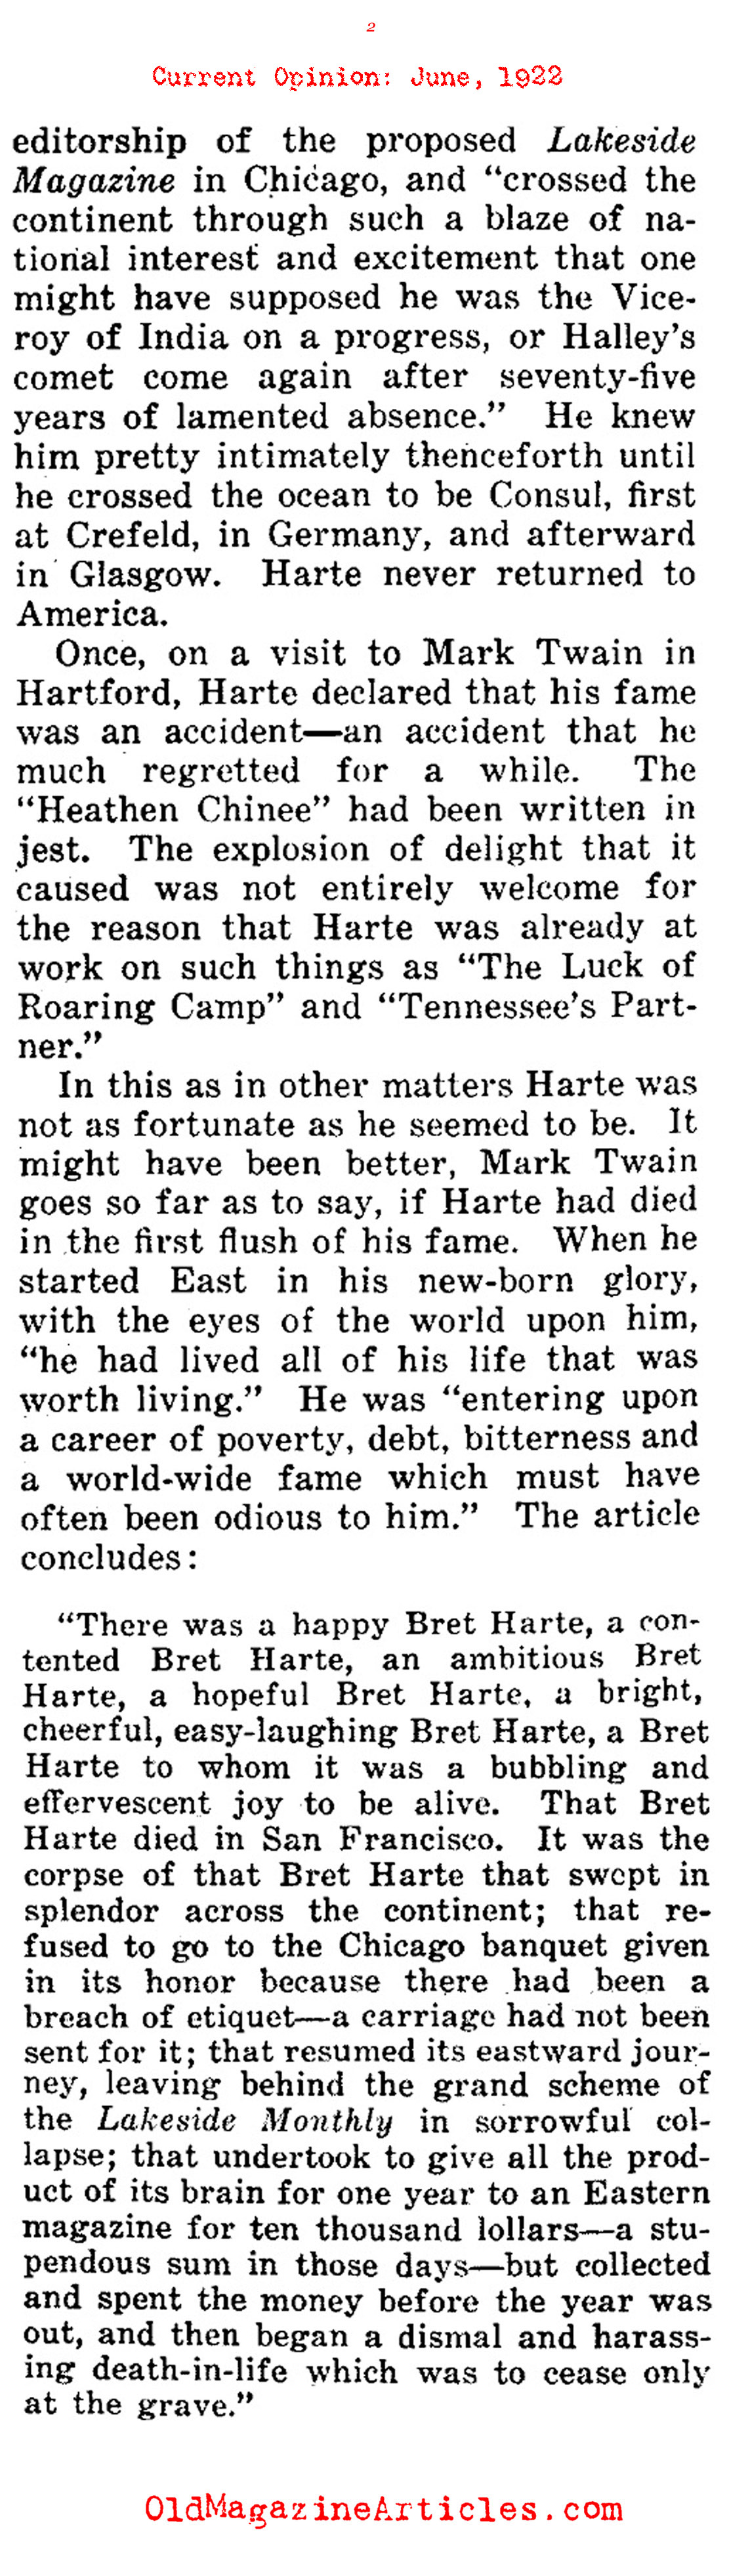 Mark Twain's Unkind Portrait of Bret Harte (Current Opinion, 1922)